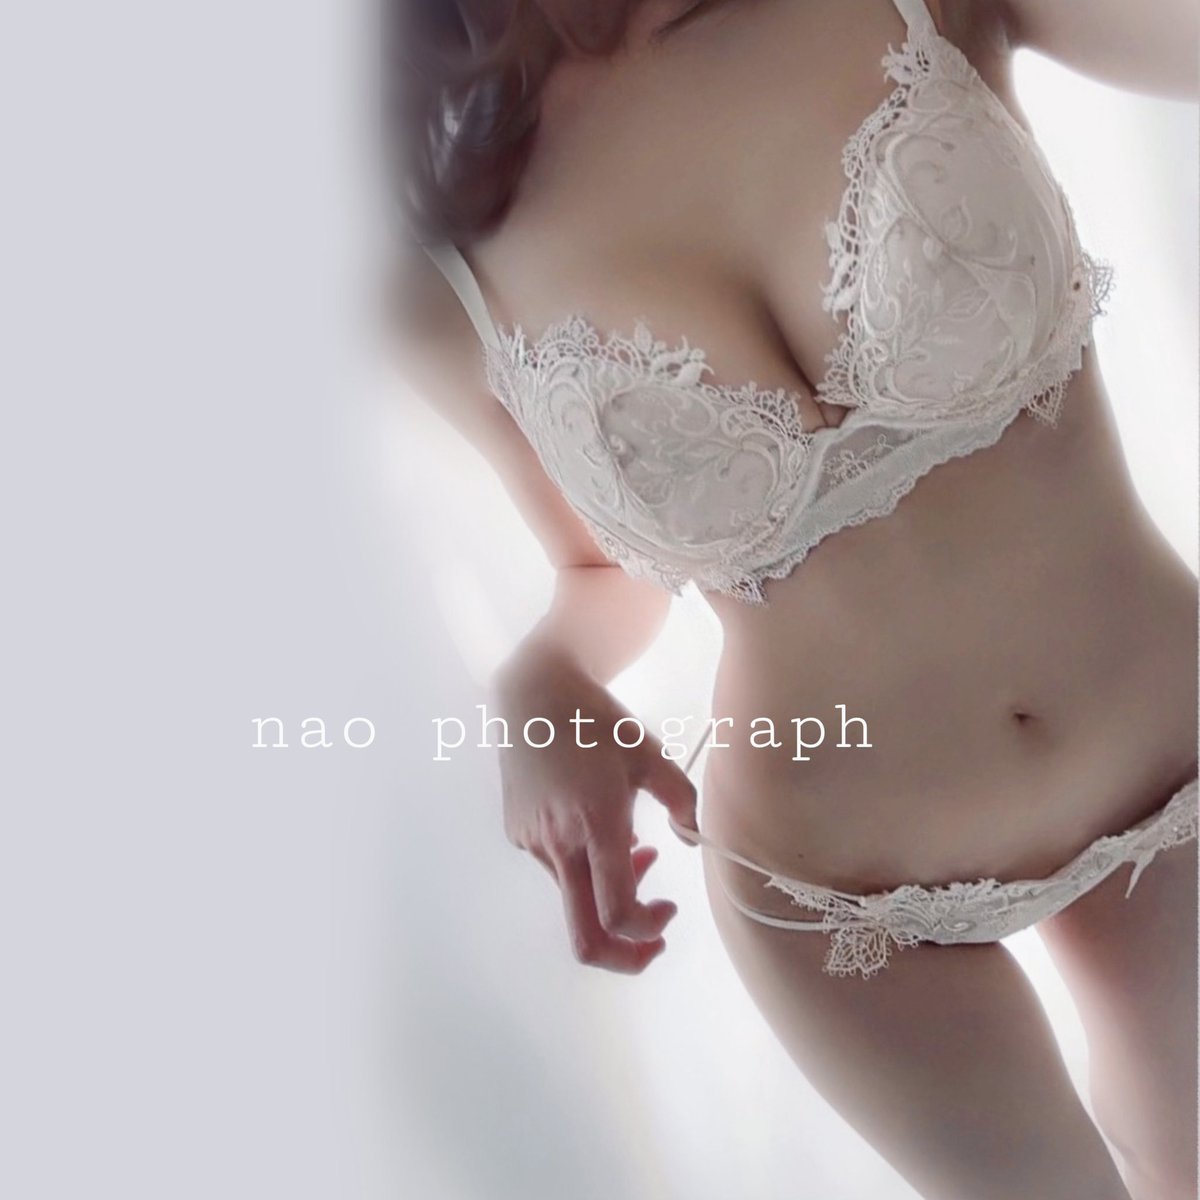 nao__photograph tweet picture